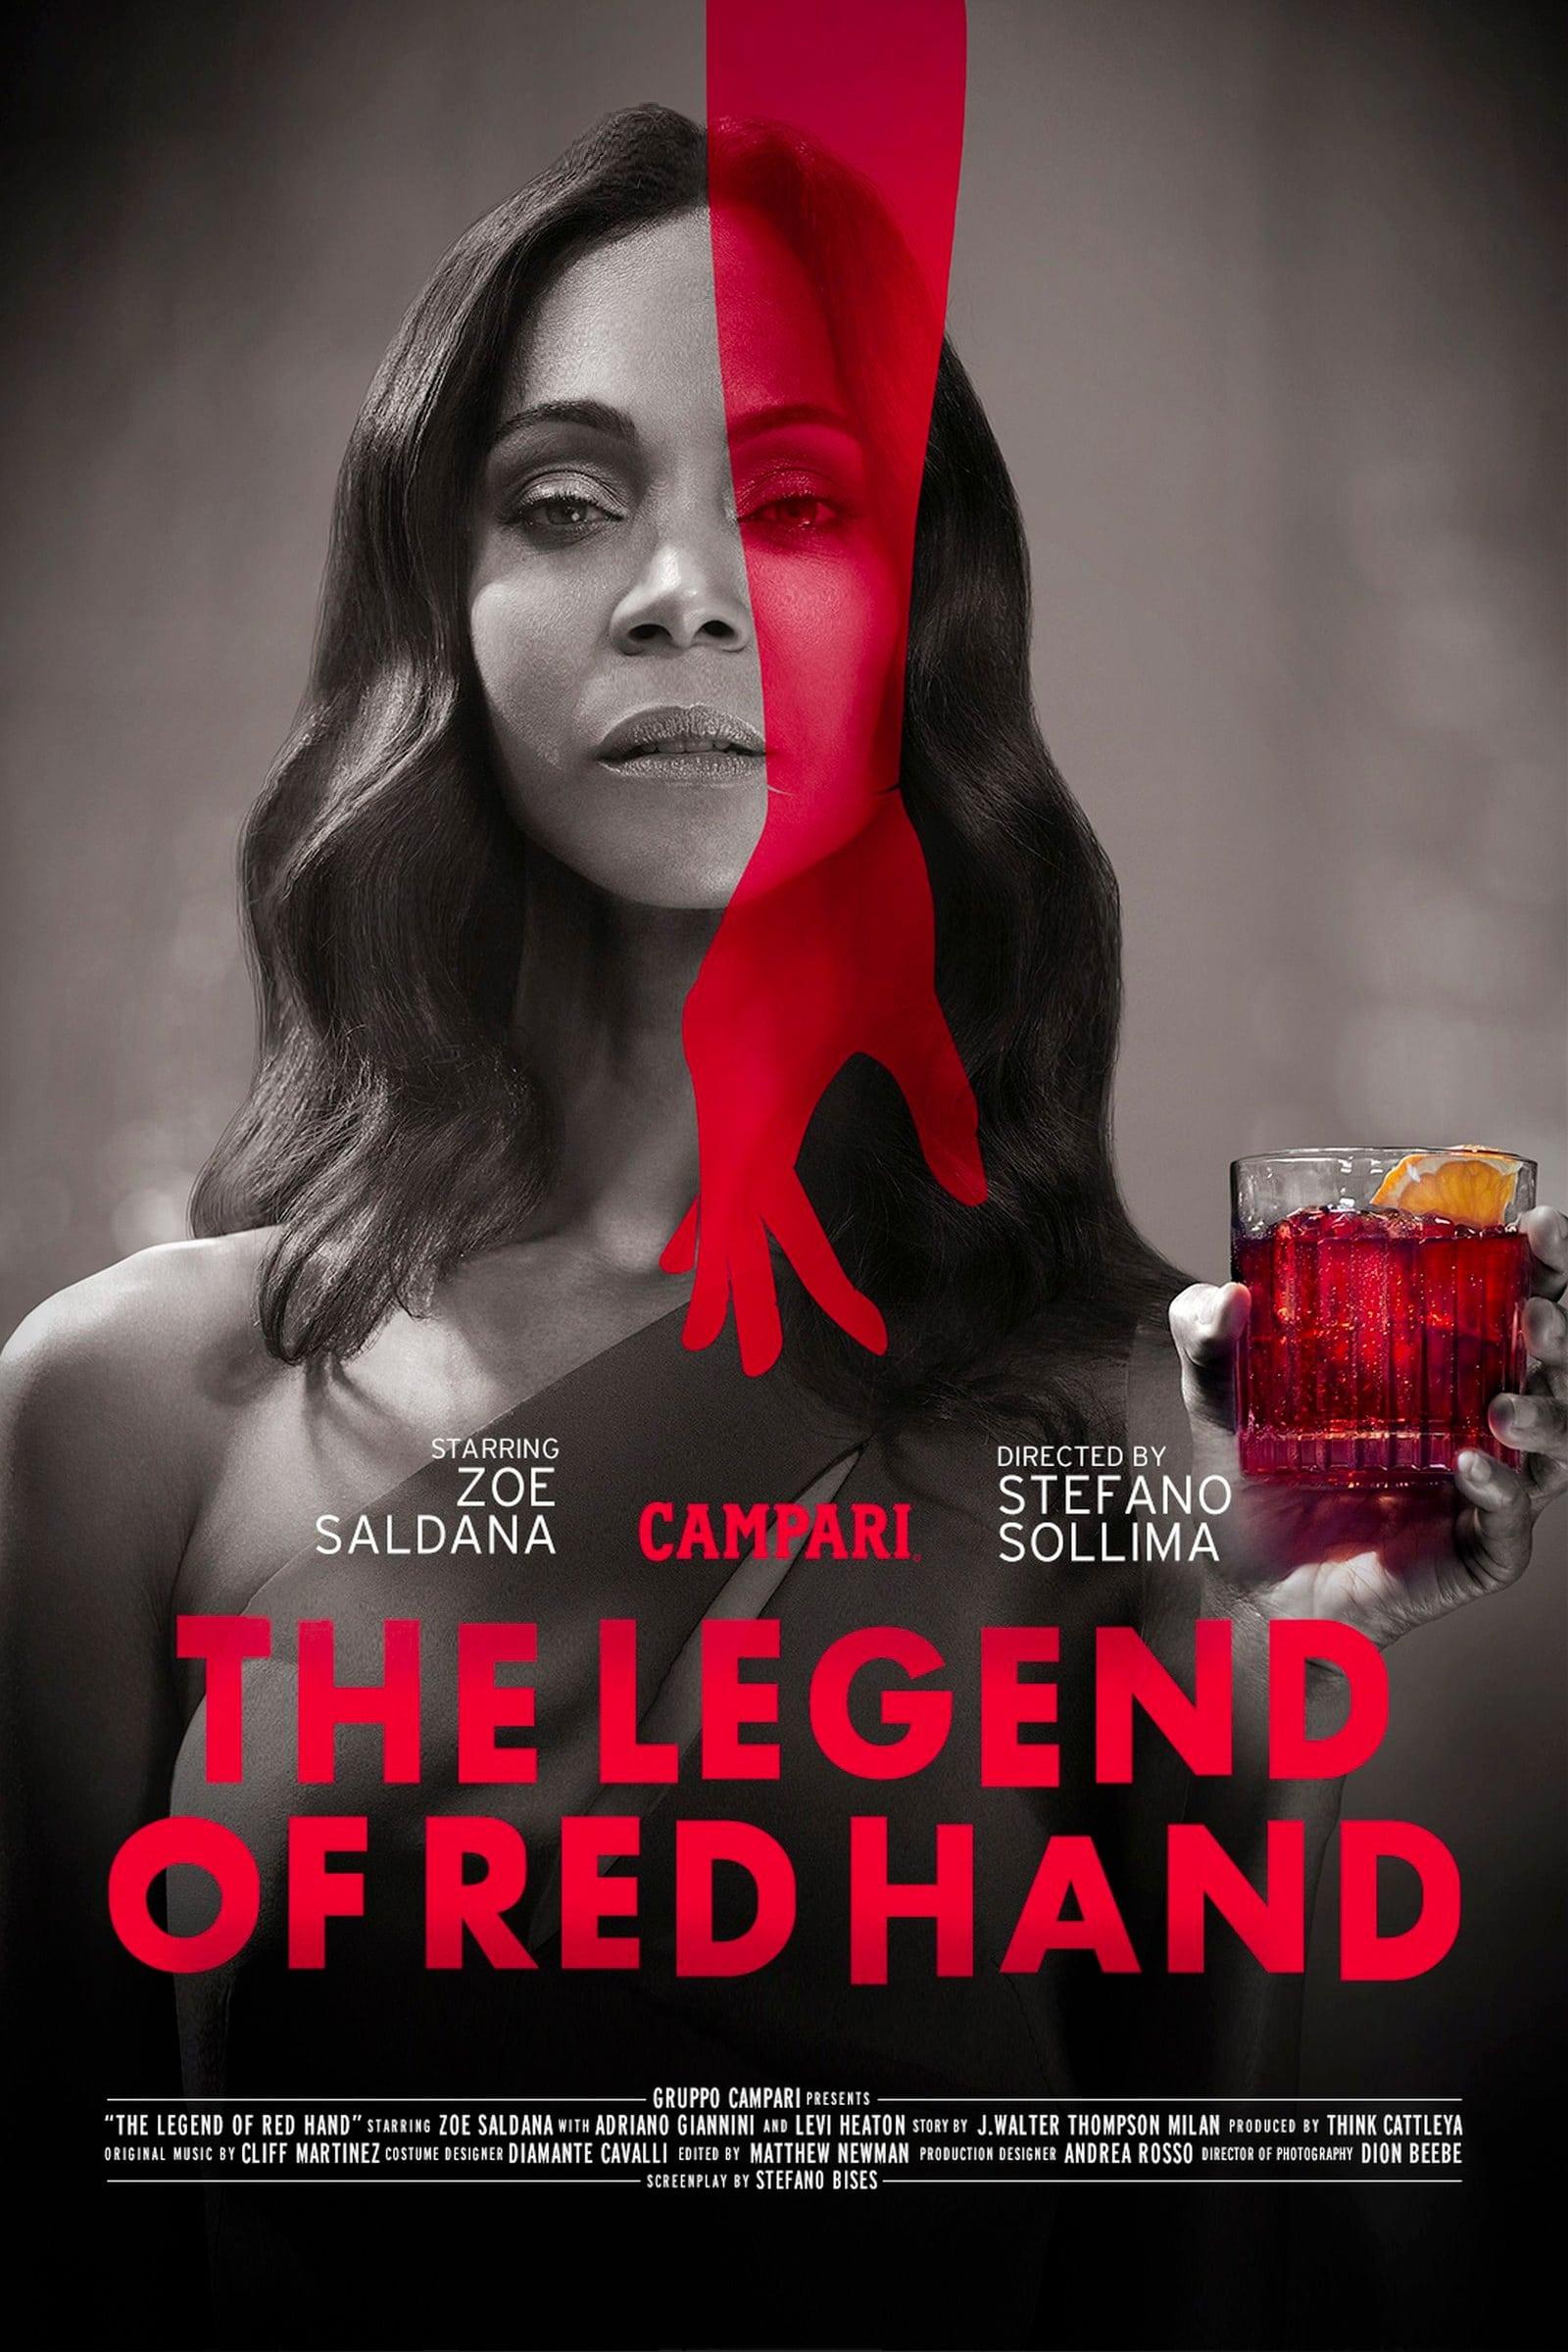 The Legend of Red Hand poster